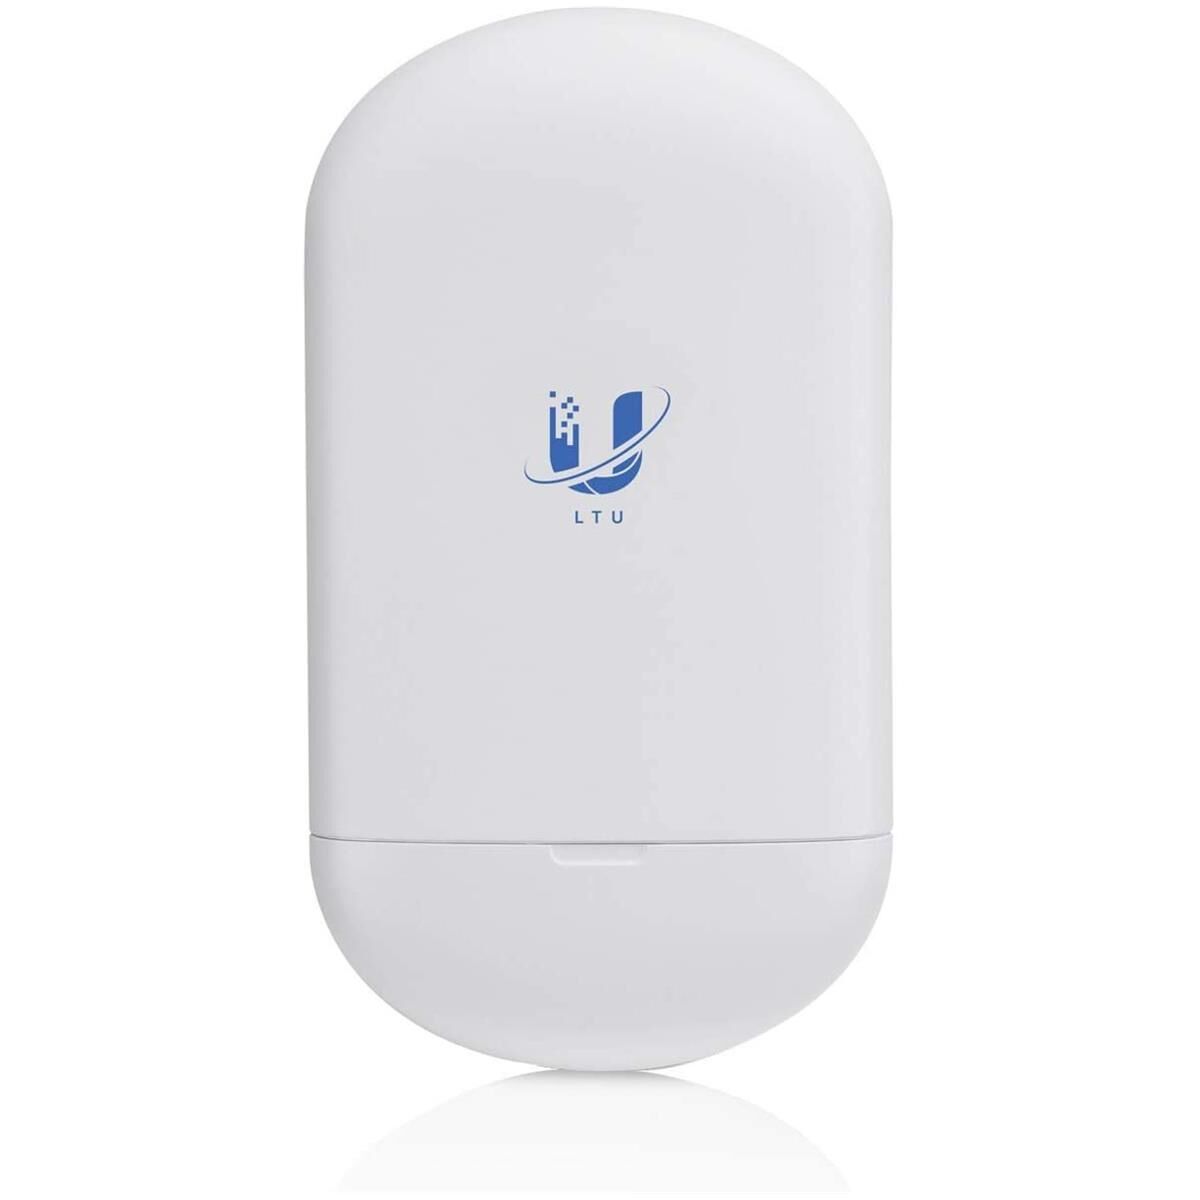 Ubiquiti Networks LTU Lite 5GHz PtMP CPE Radio Client with Integrated Antenna